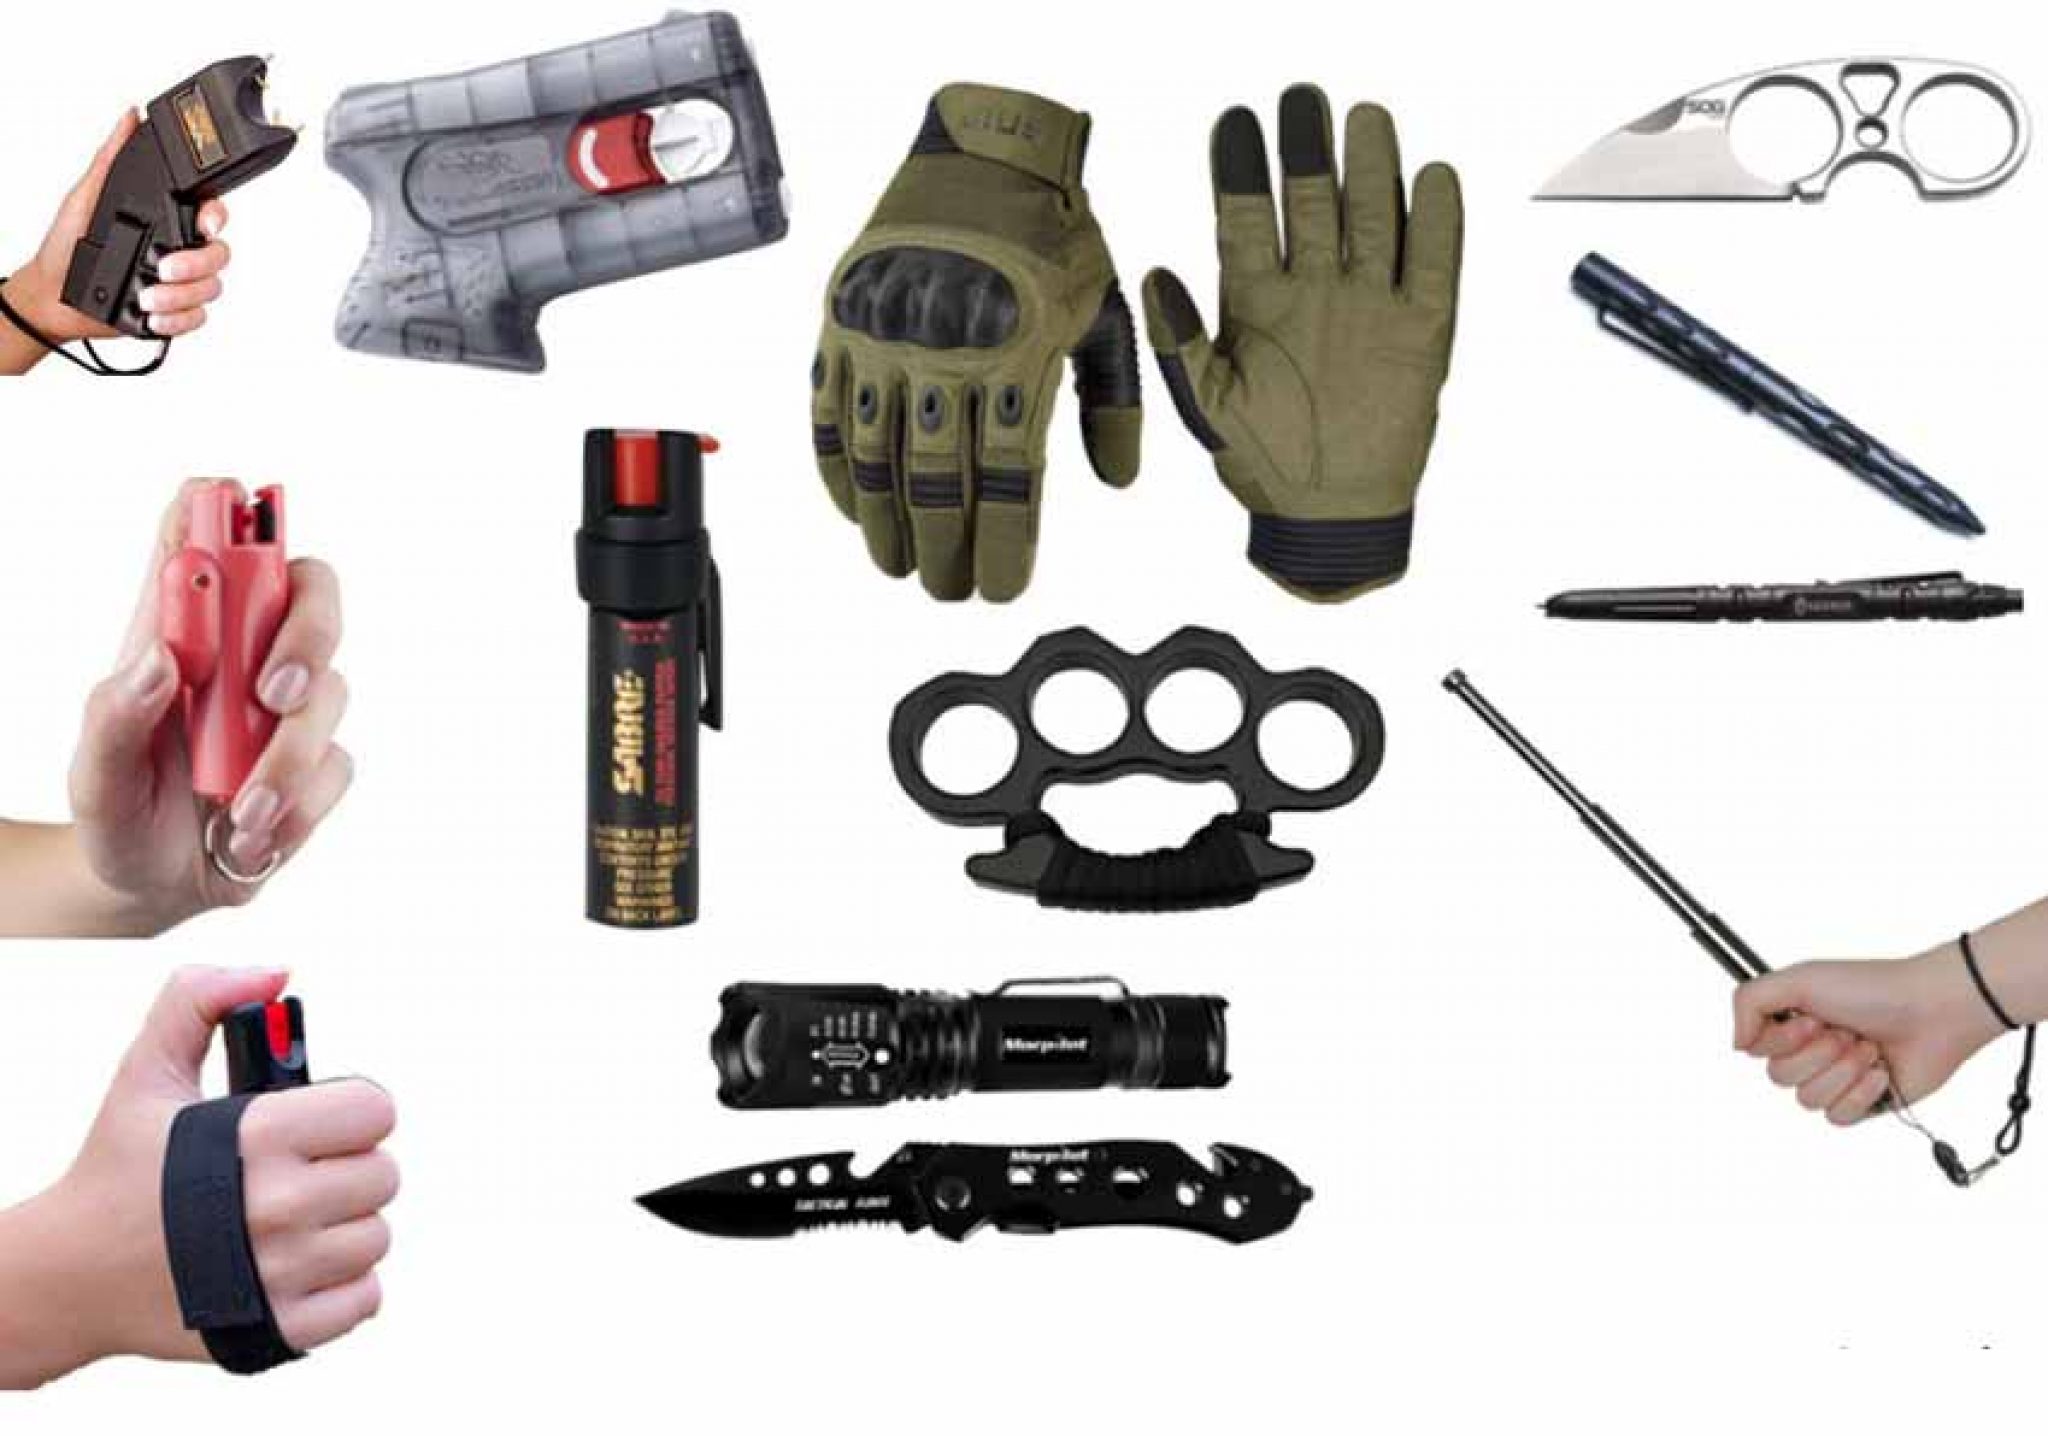 9 Legal Self Defense Weapons You Can Buy for Protection: Expert Guide